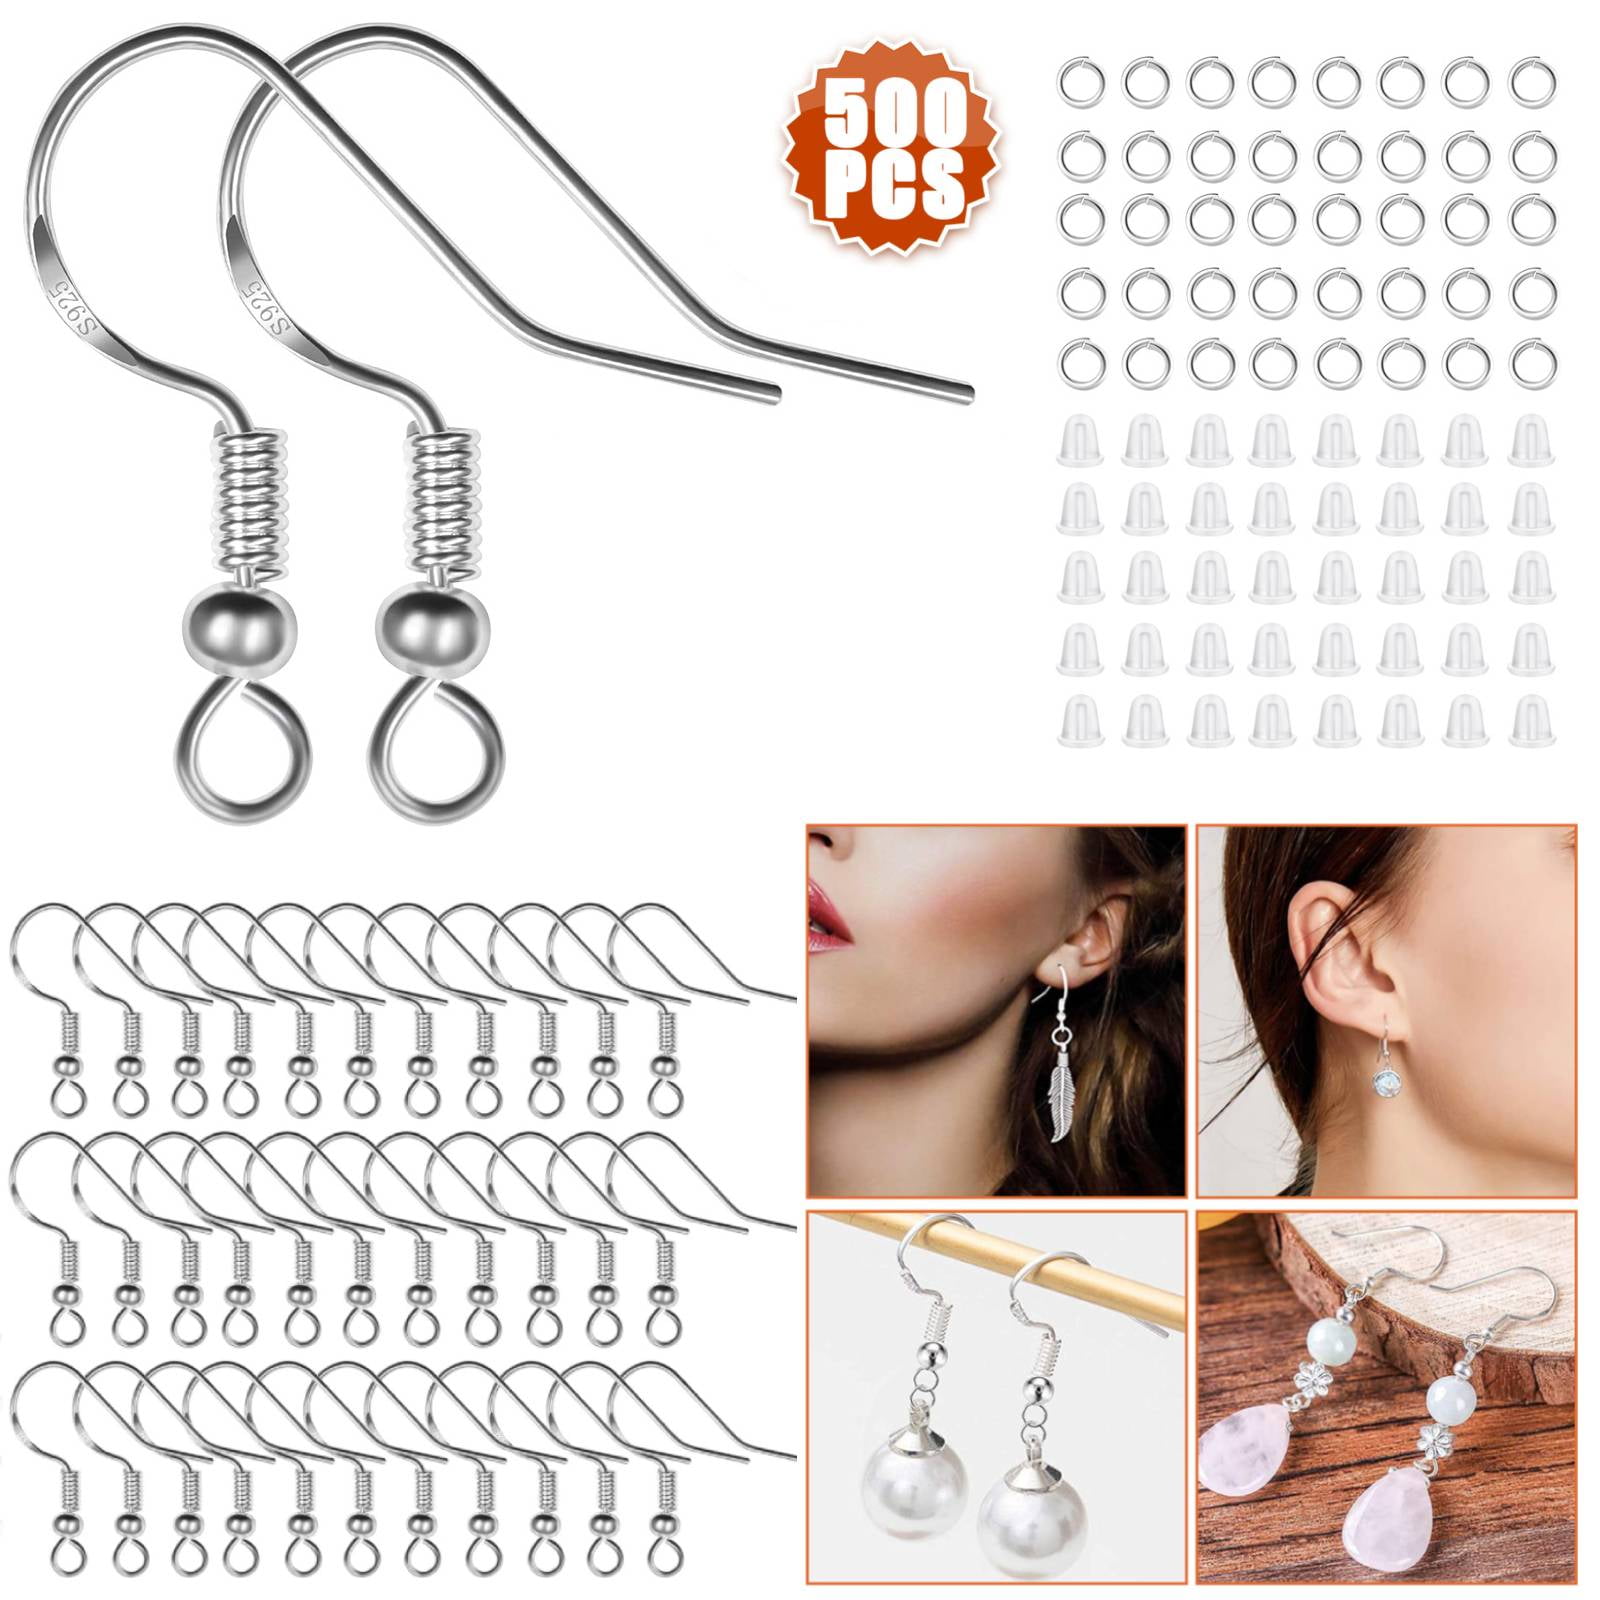 100 PCS/50 Pairs Earring Hooks for Jewelry Making, 925 Silver-Plated  Hypoallergenic 300 PCS Upgraded Earring Making kit, Earring Making Supplies  with